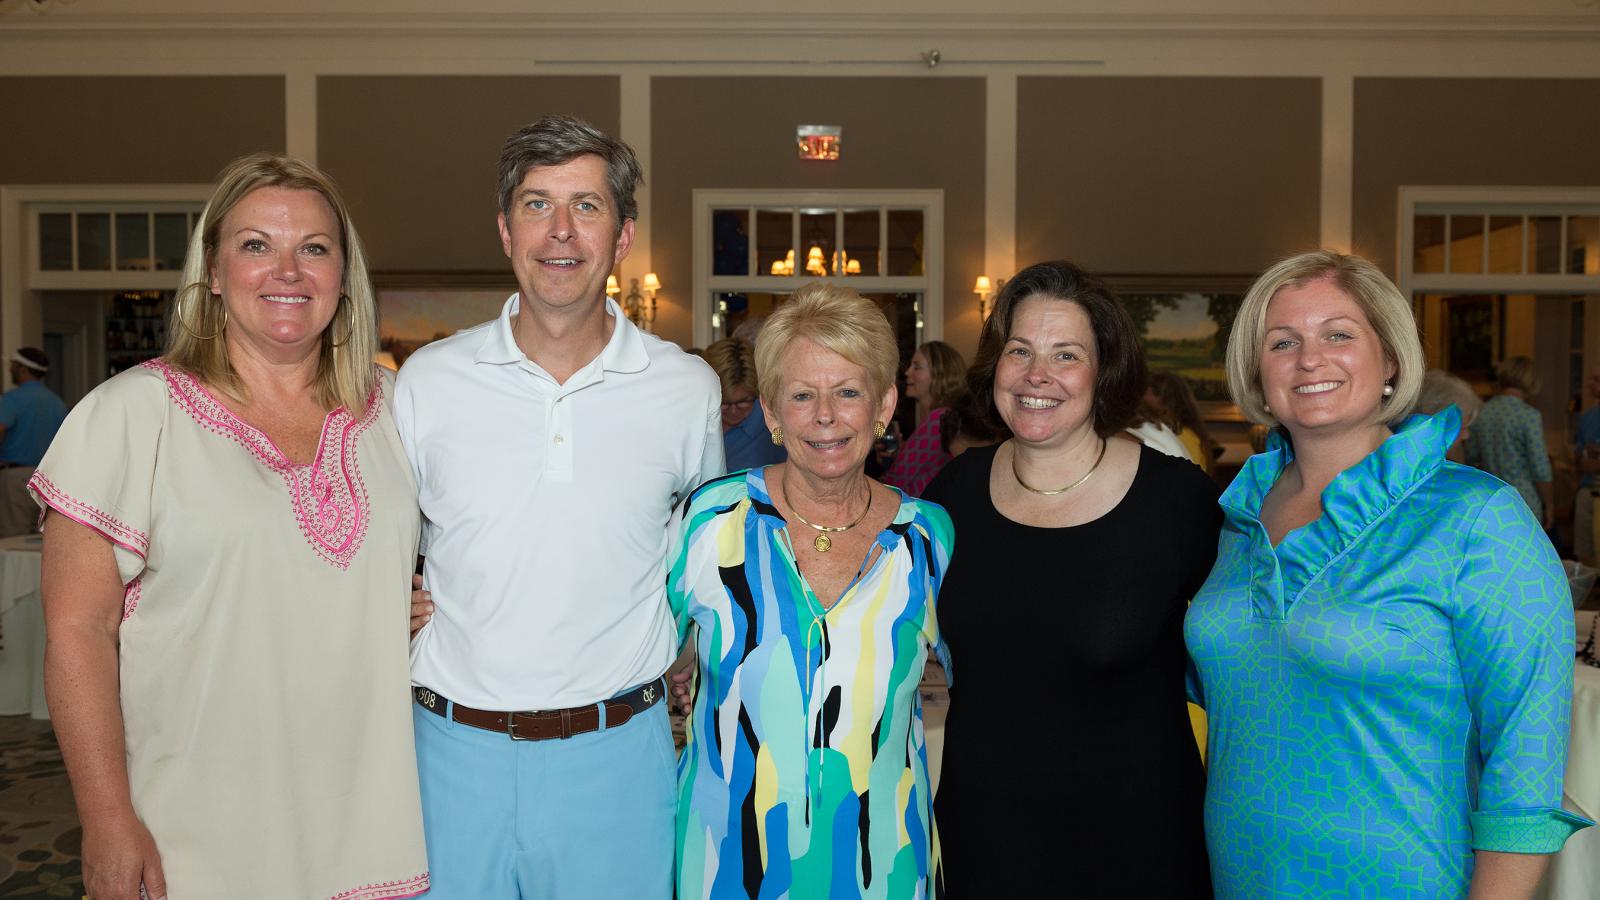 Harper's Hope Golf and Auction